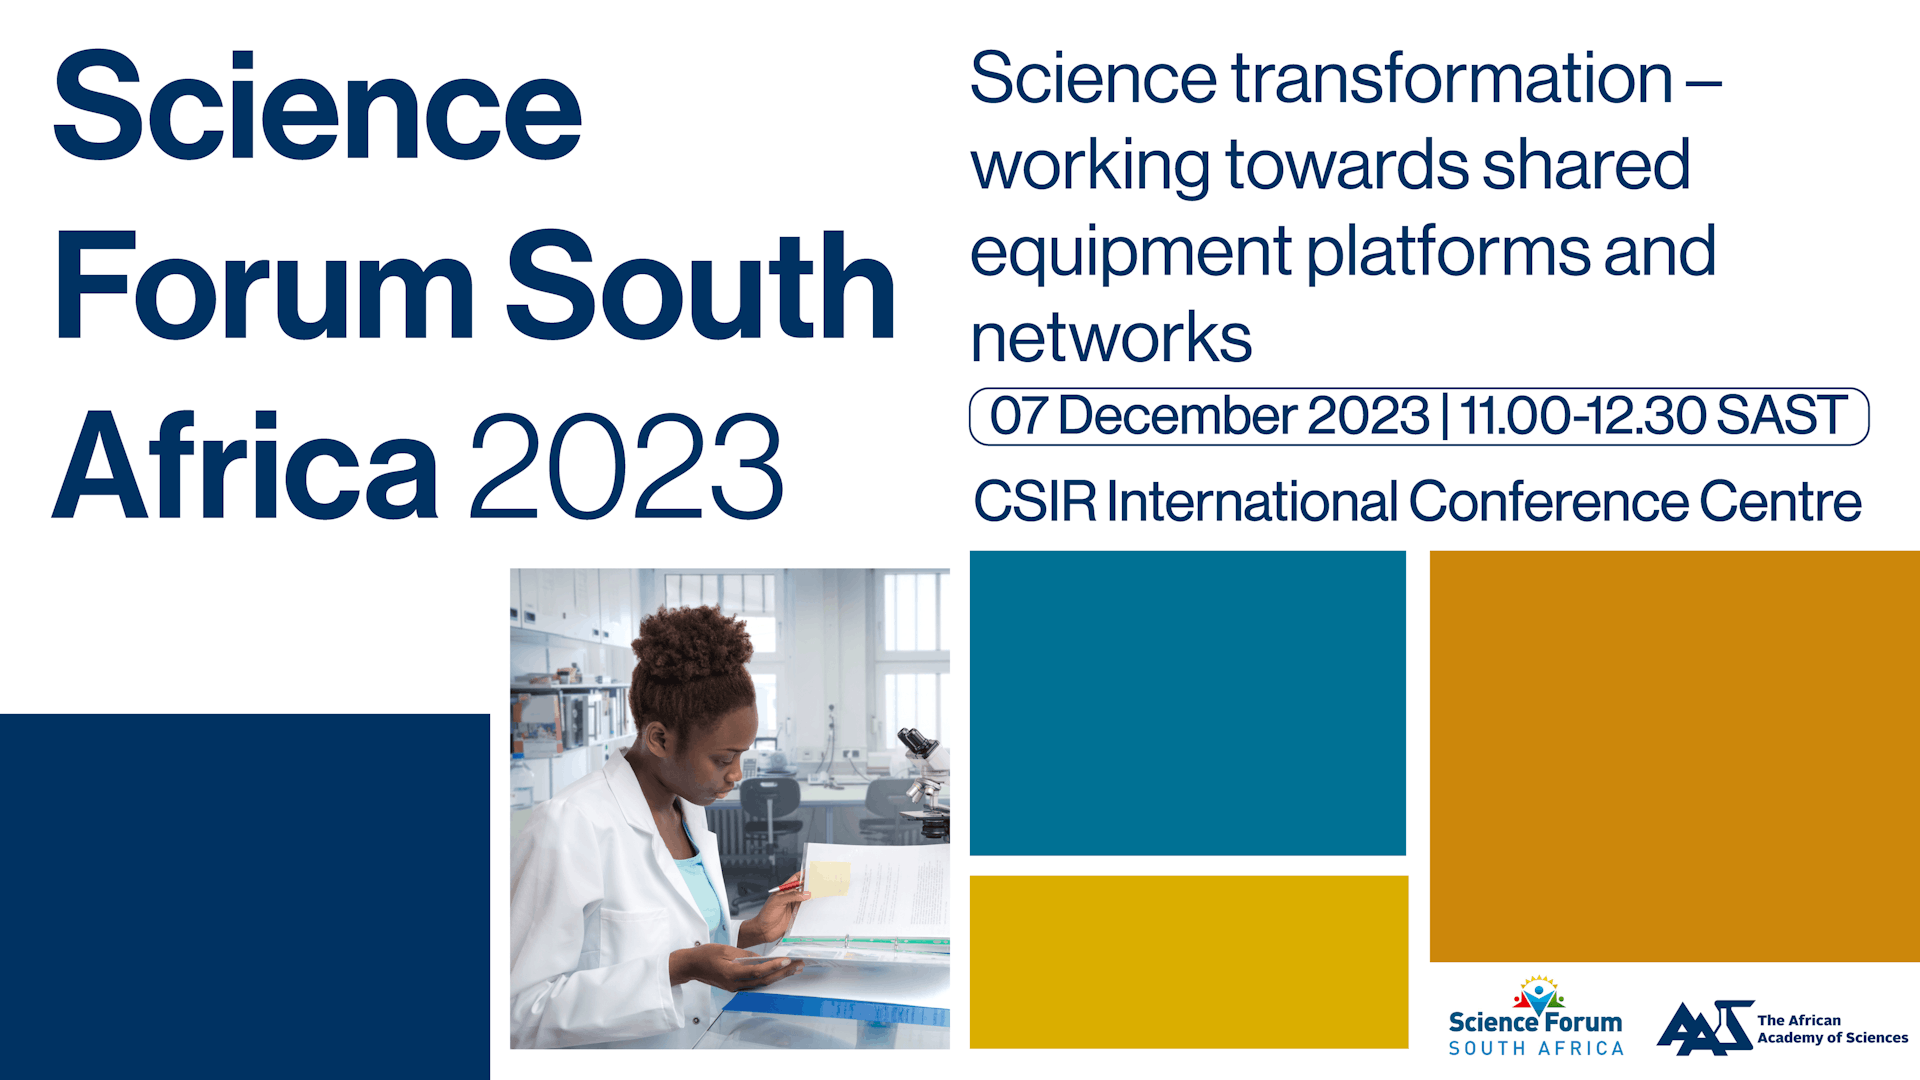 Igniting Conversations: AAS at Science Forum South Africa 2023